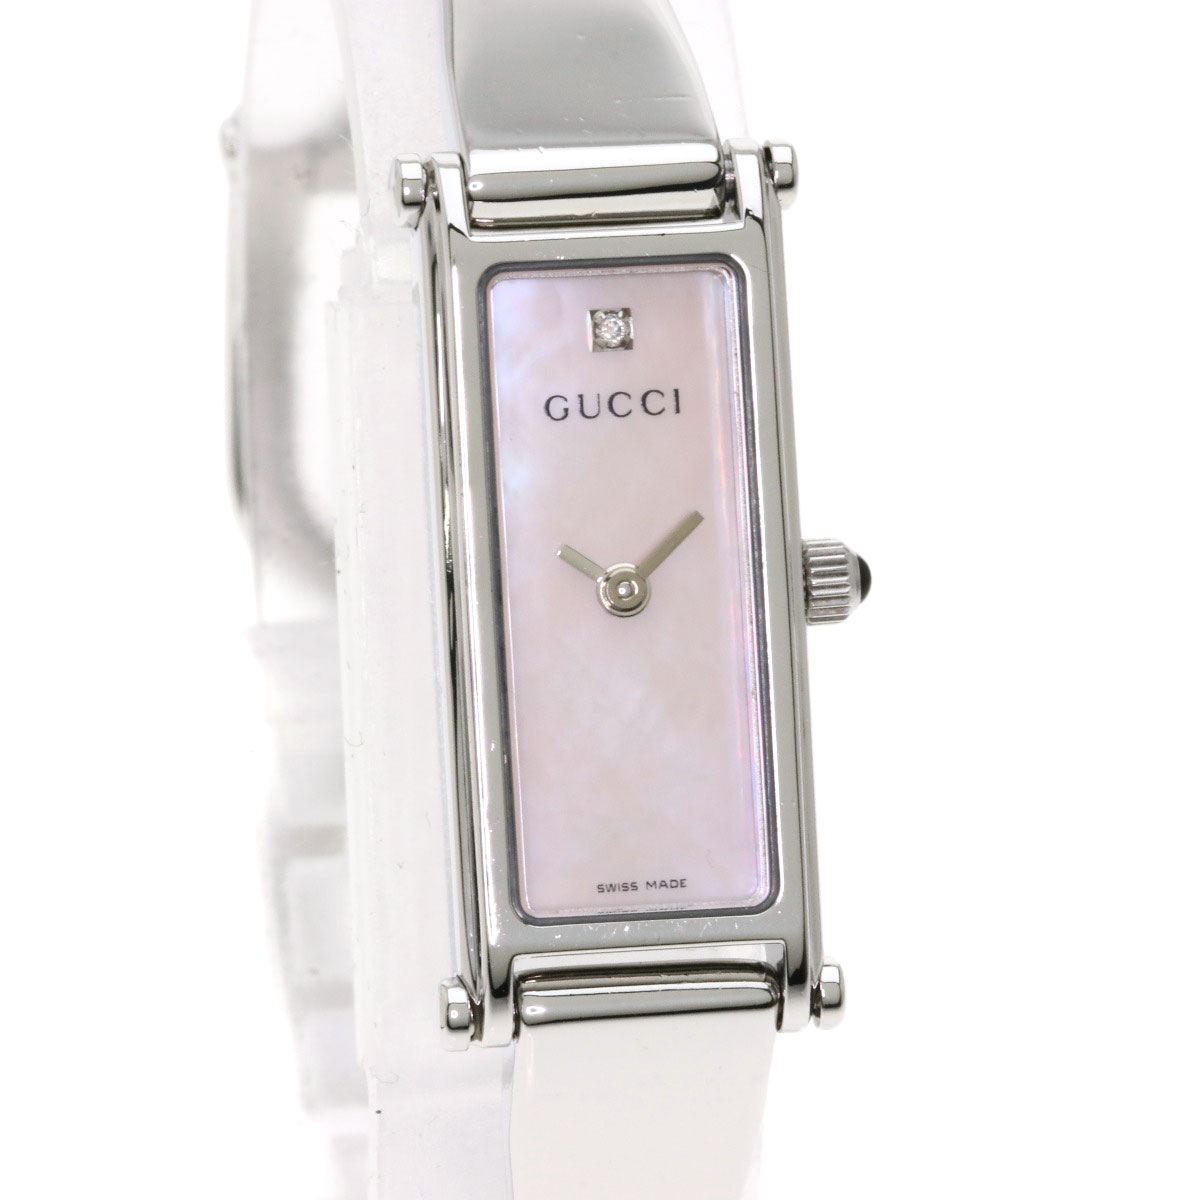 GUCCI Square face Watches 1500L Stainless Steel/Stainless Steel Ladies ...